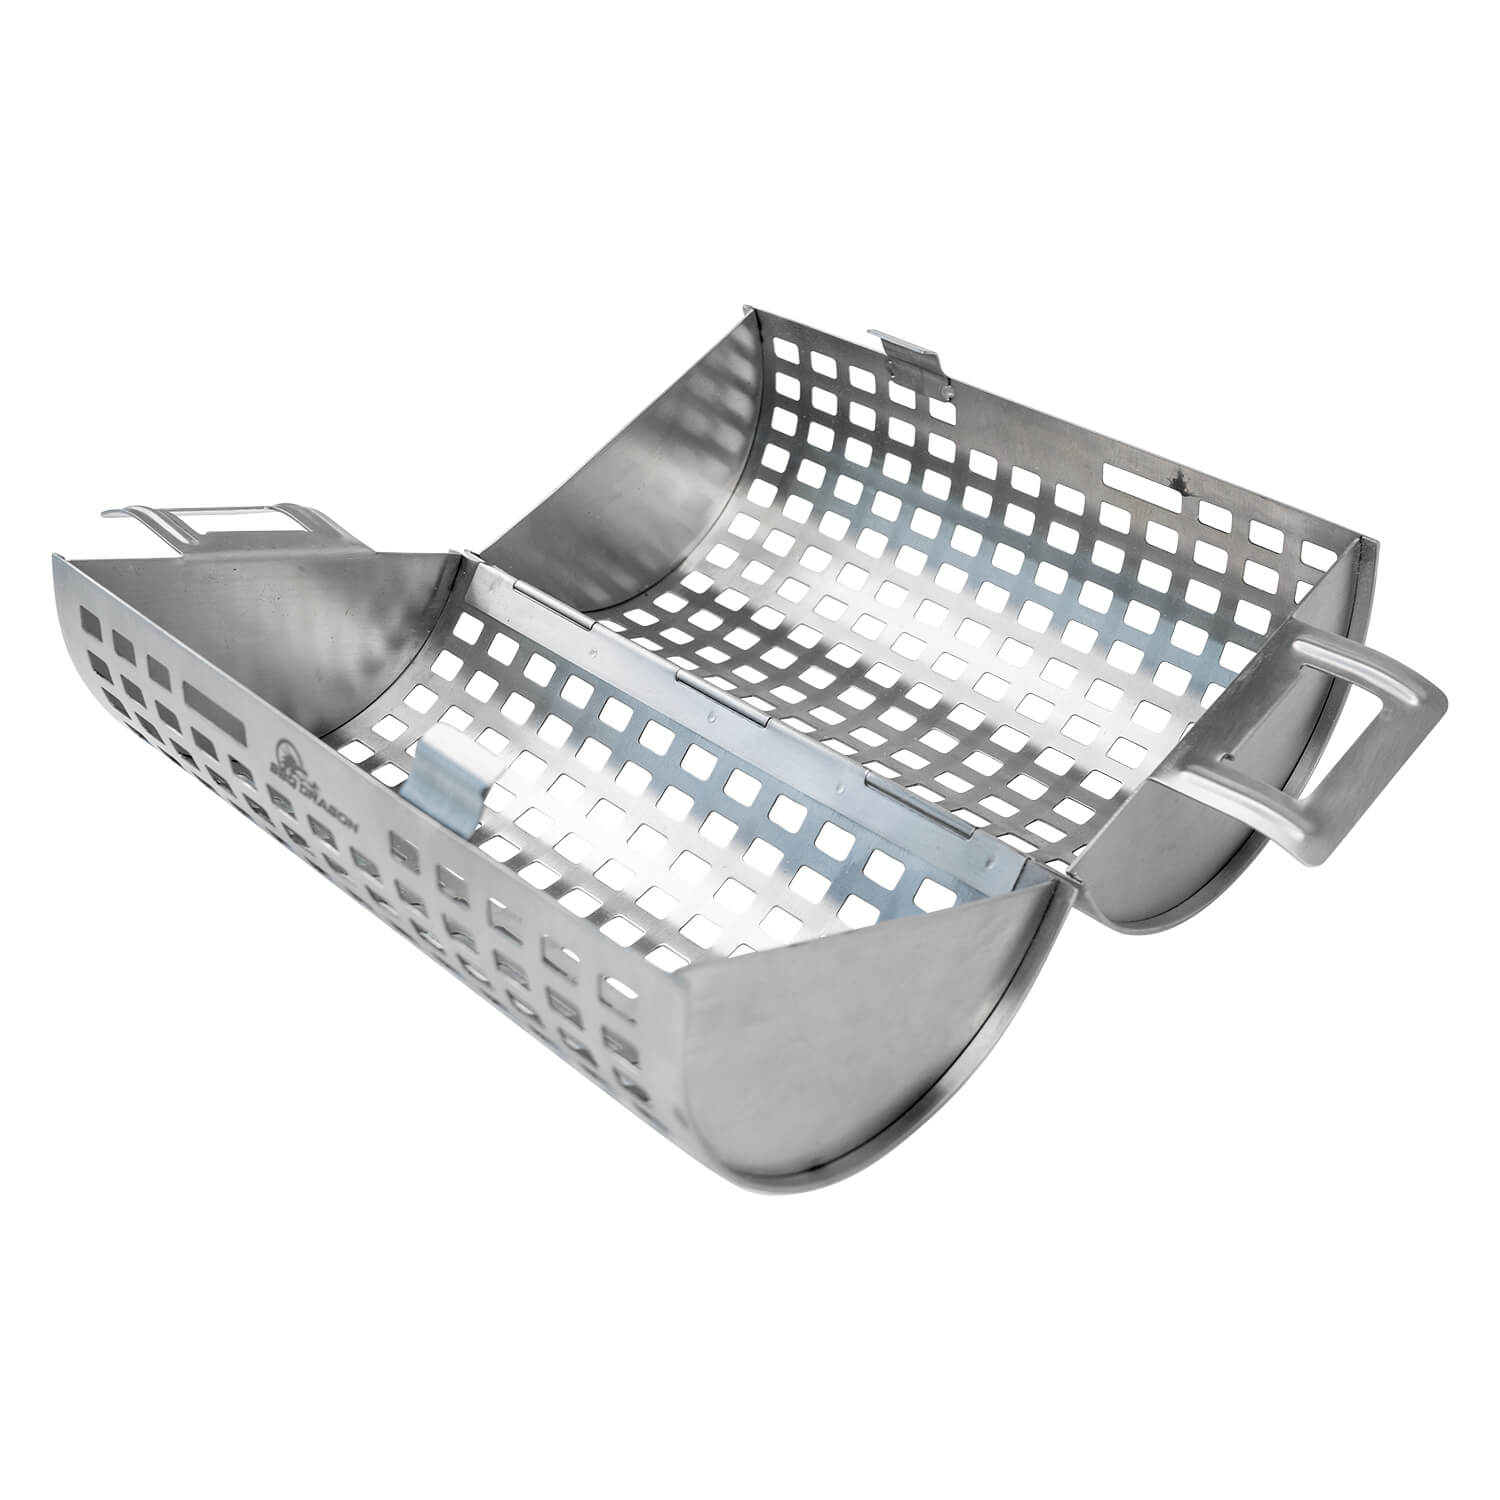 BBQ Dragon Stainless Steel Rolling Grill Basket and Veggie Basket